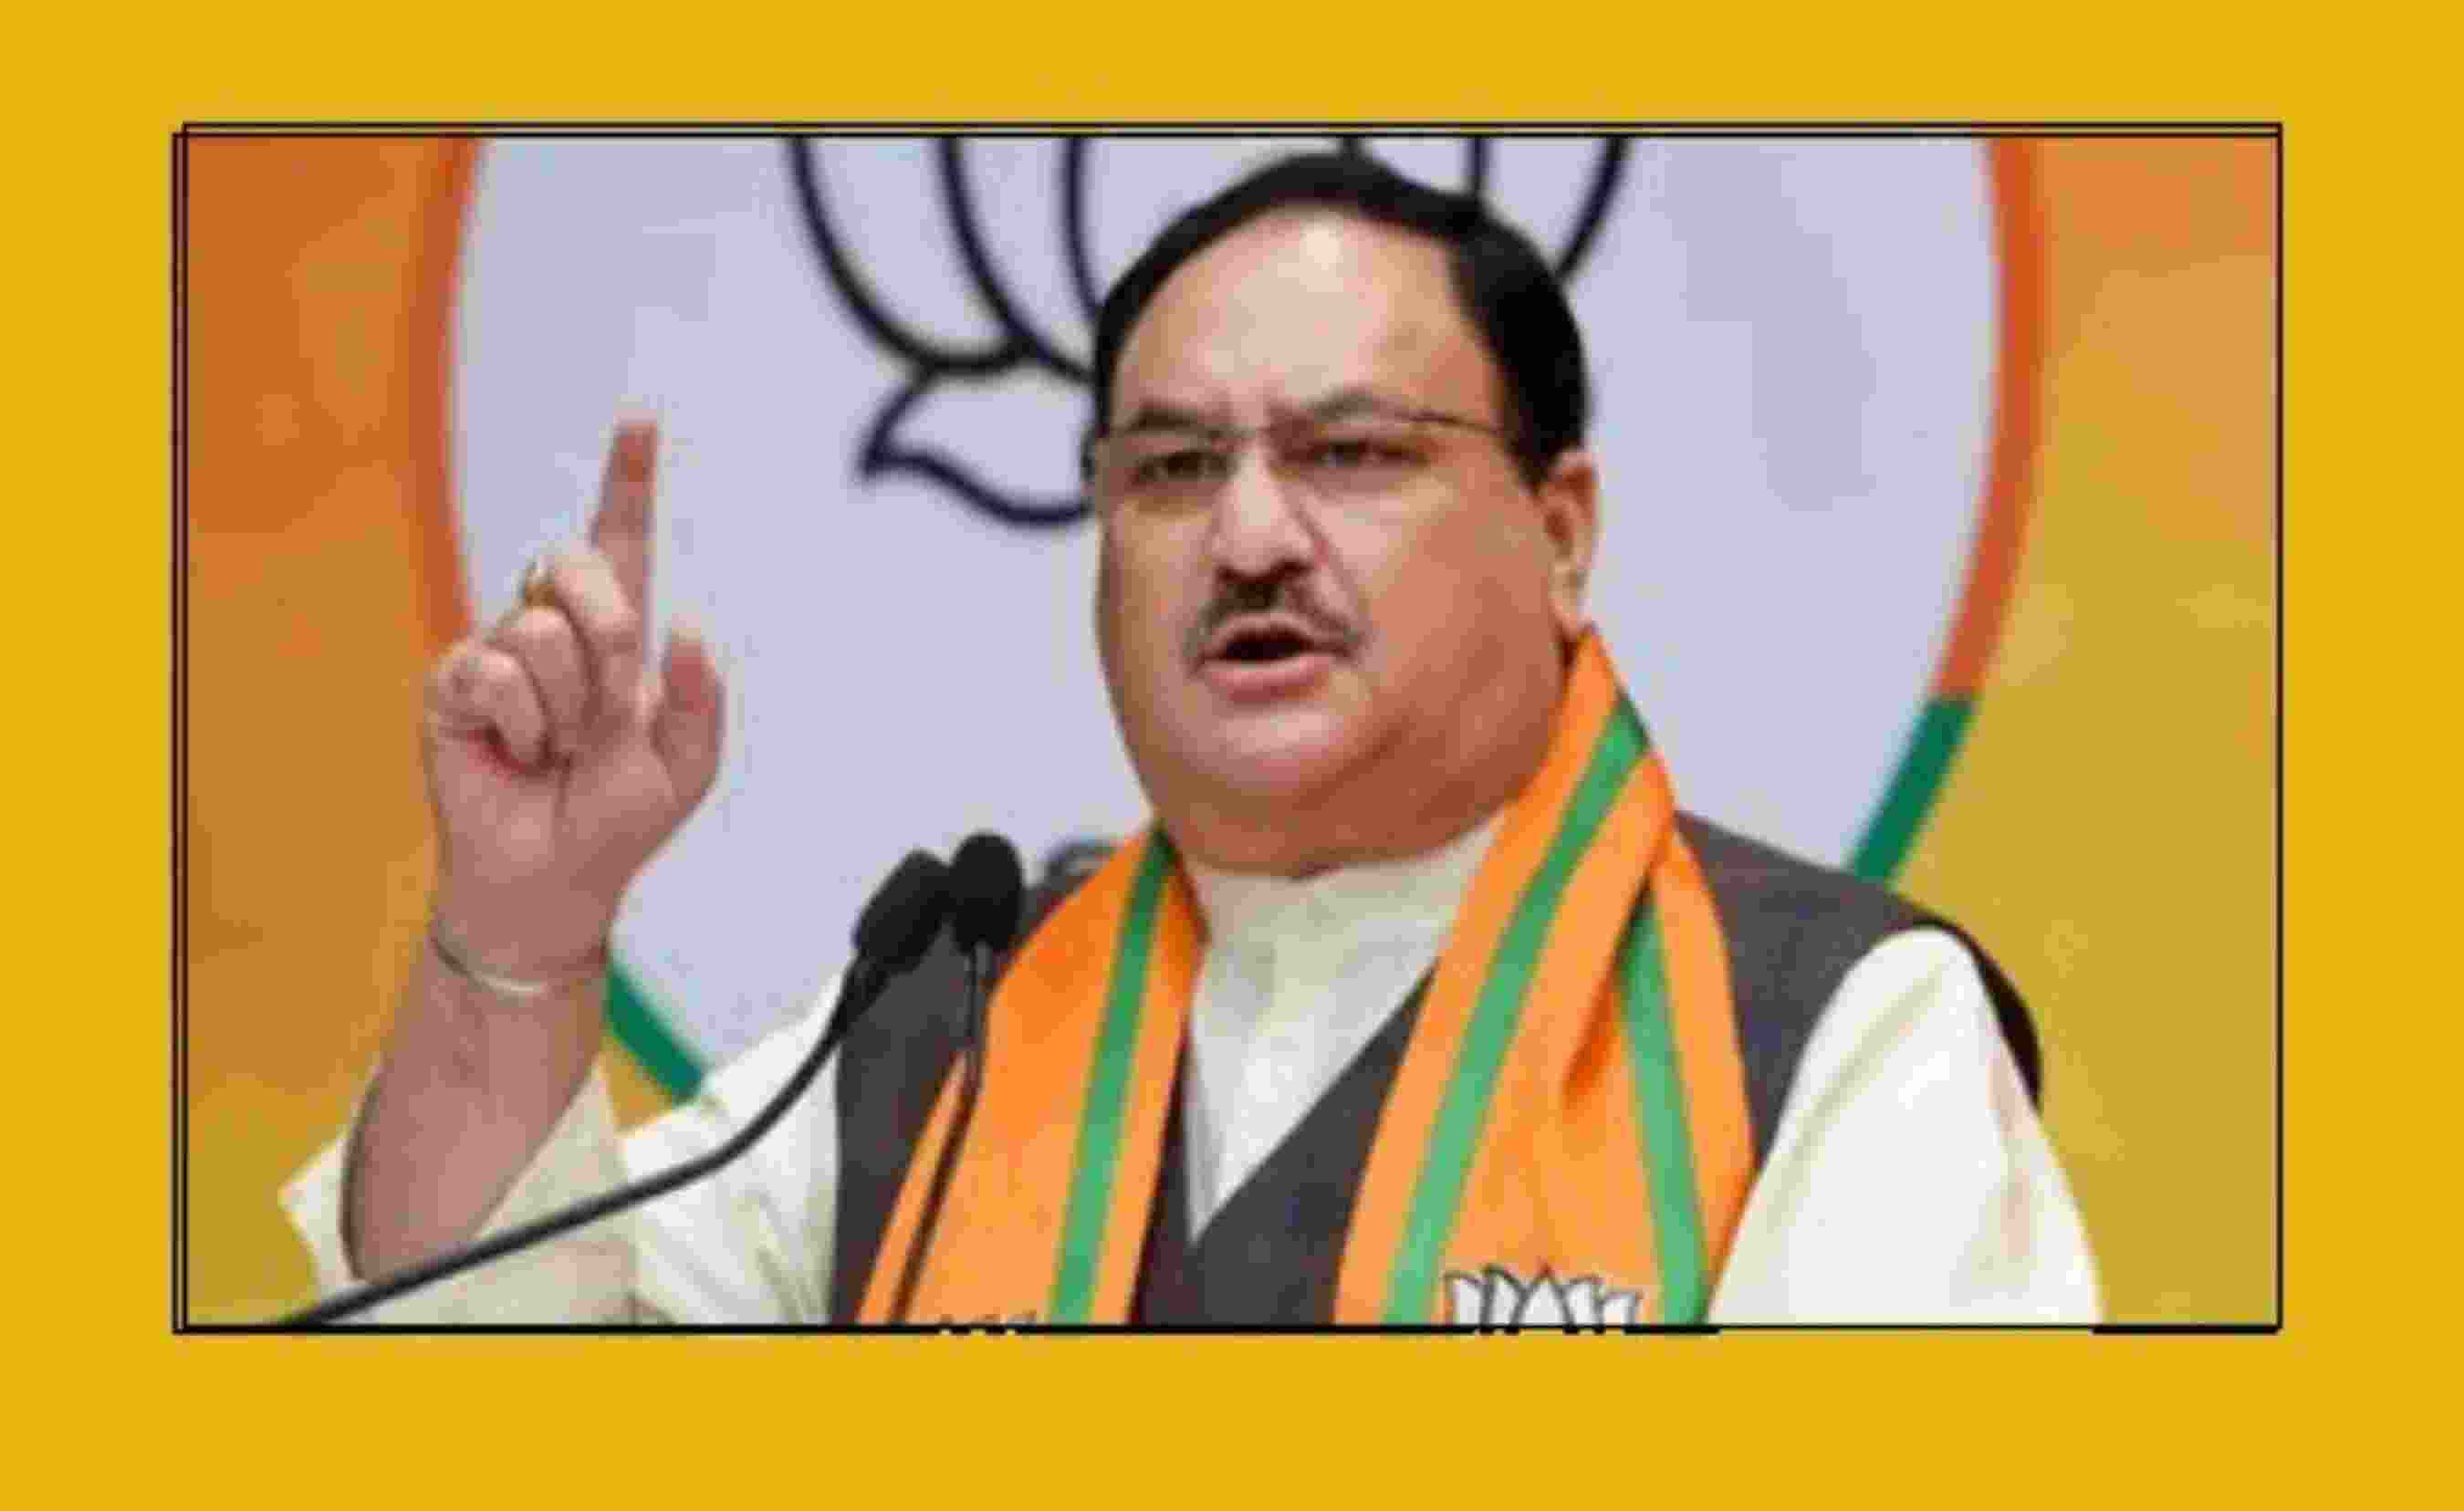 Nadda’s meeting with other BJP leaders is likely to involve discussions on future party programmes in the UT and preparations for Assembly, local bodies, Municipal, and panchayat elections.